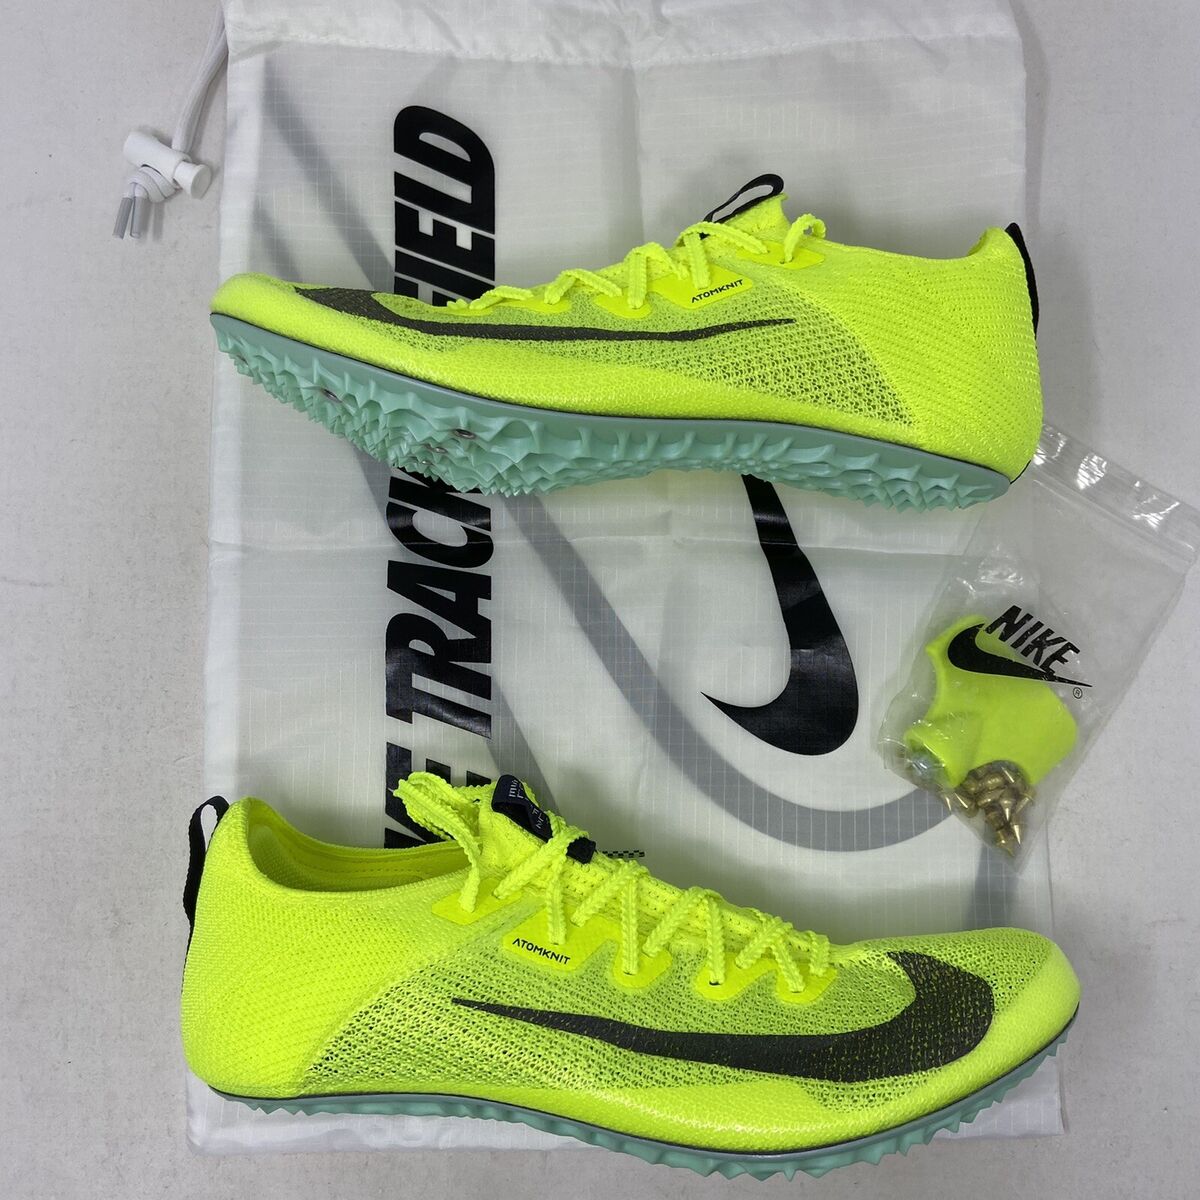 Nike Zoom Superfly 2 Volt Green Mint Track Spikes DR9923-700 Mens 10.5 | eBay